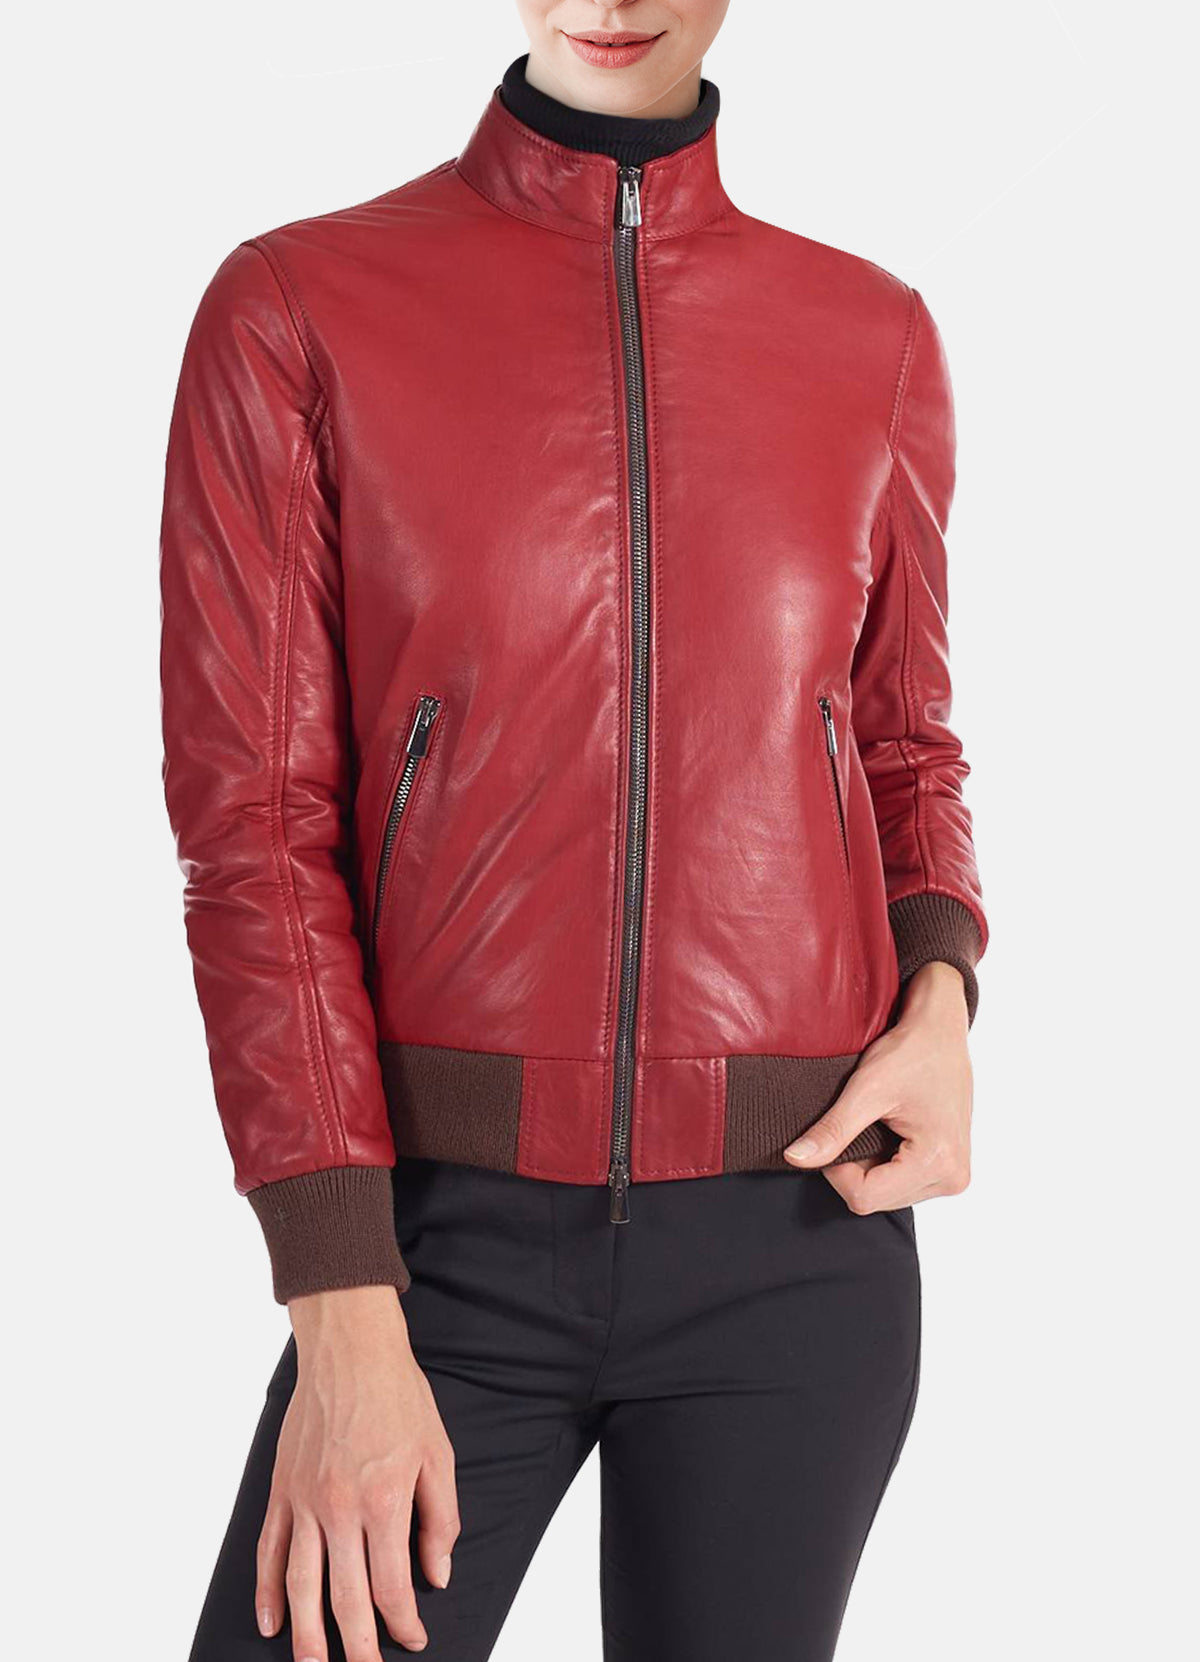 Womens Soft Red Bomber Leather Jacket